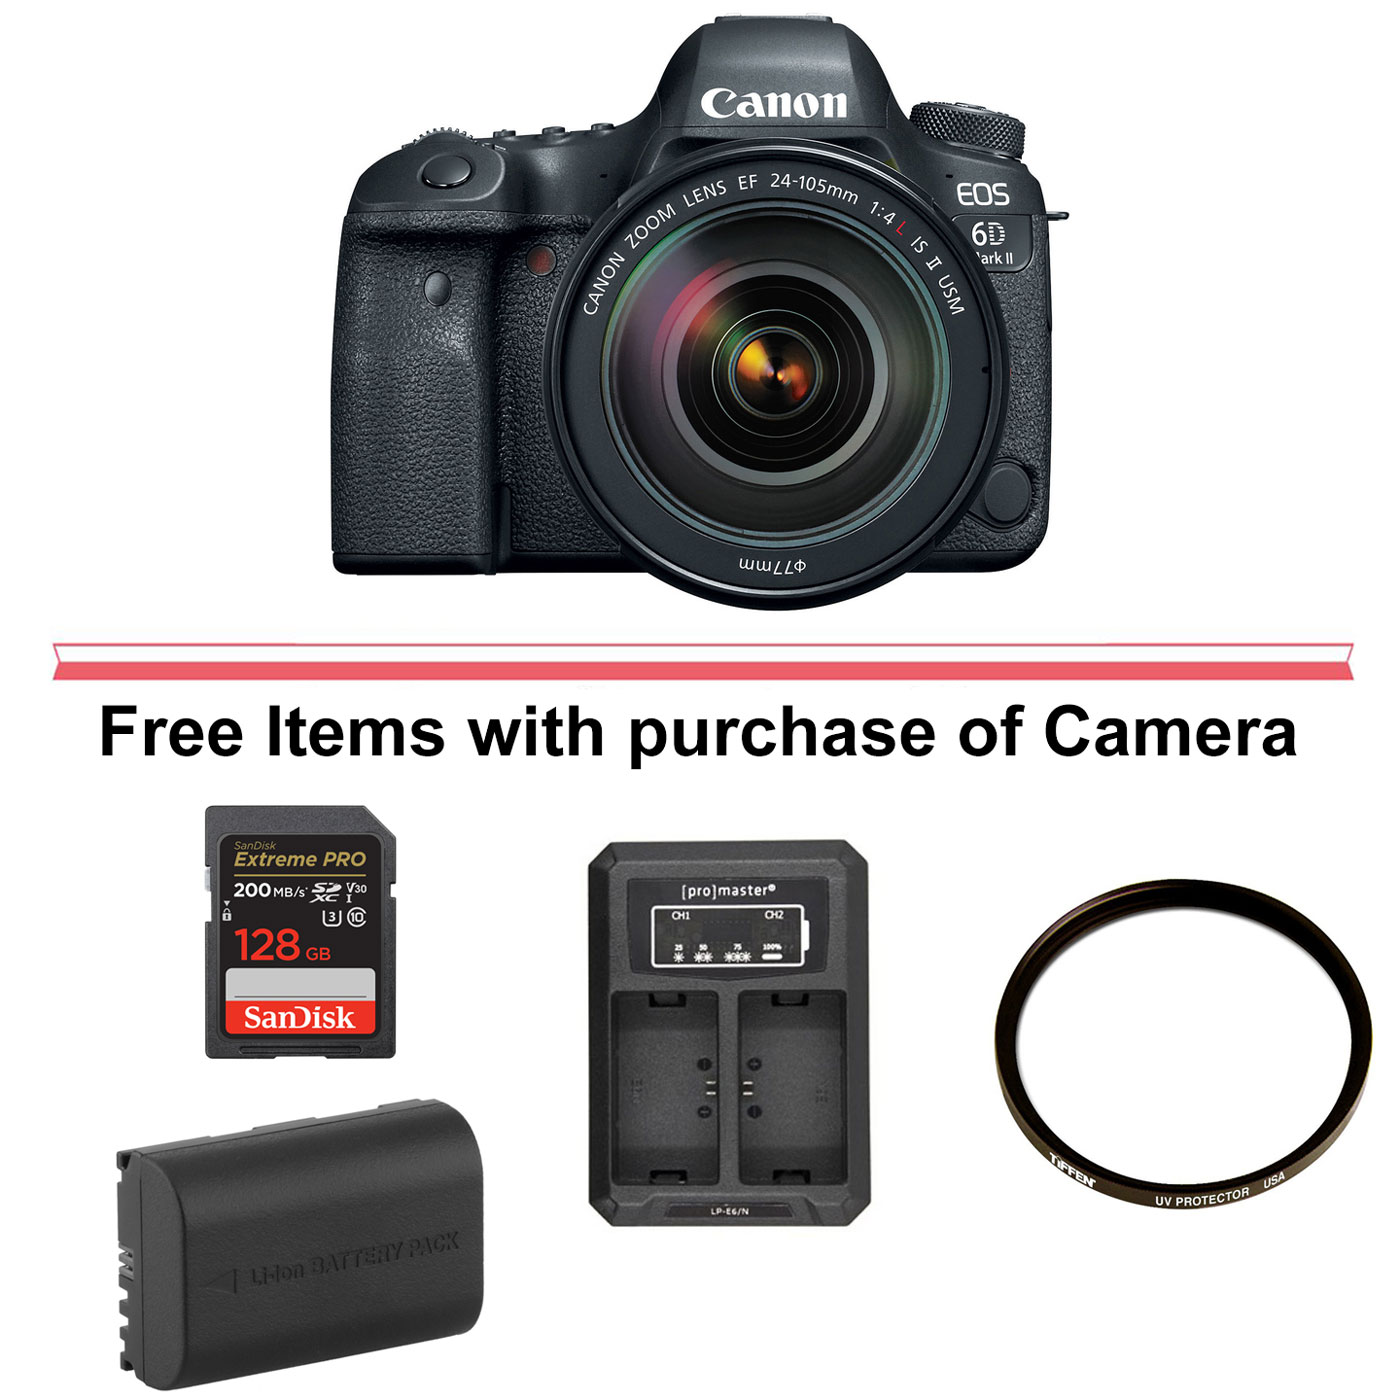 Canon EOS 6D Mark II DSLR Camera with 24-105mm Lens and Accessories Kit